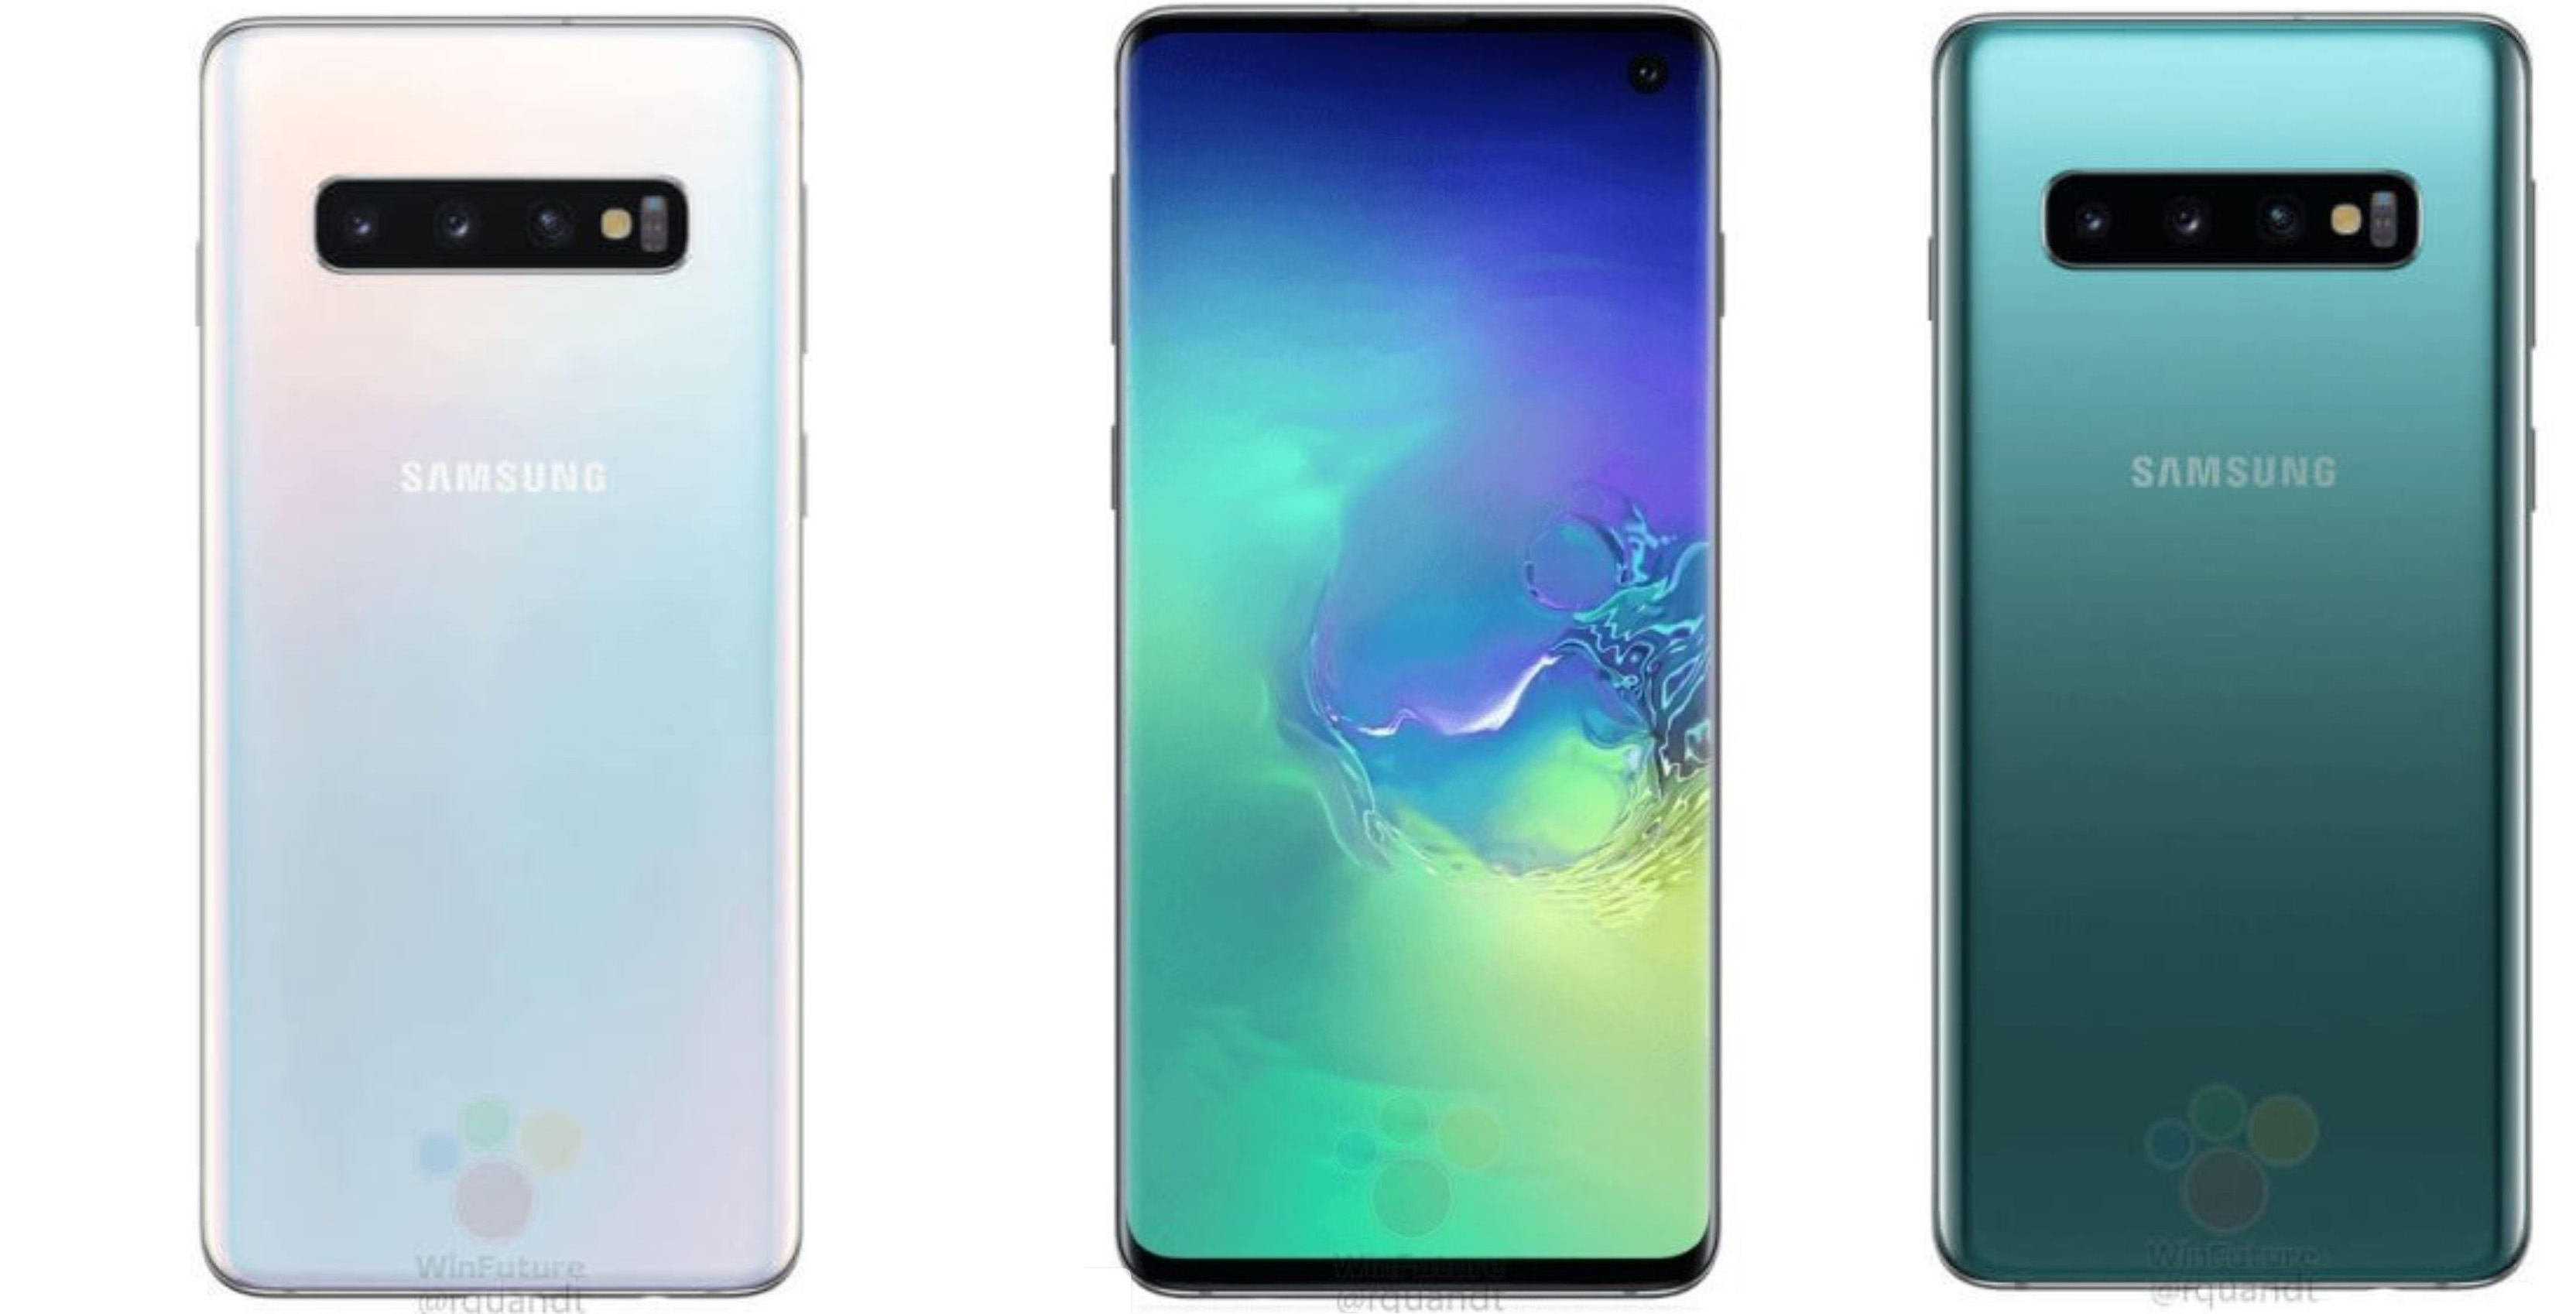 Here Are Renders Of The Samsung Galaxy S10 And S10 In White And Teal